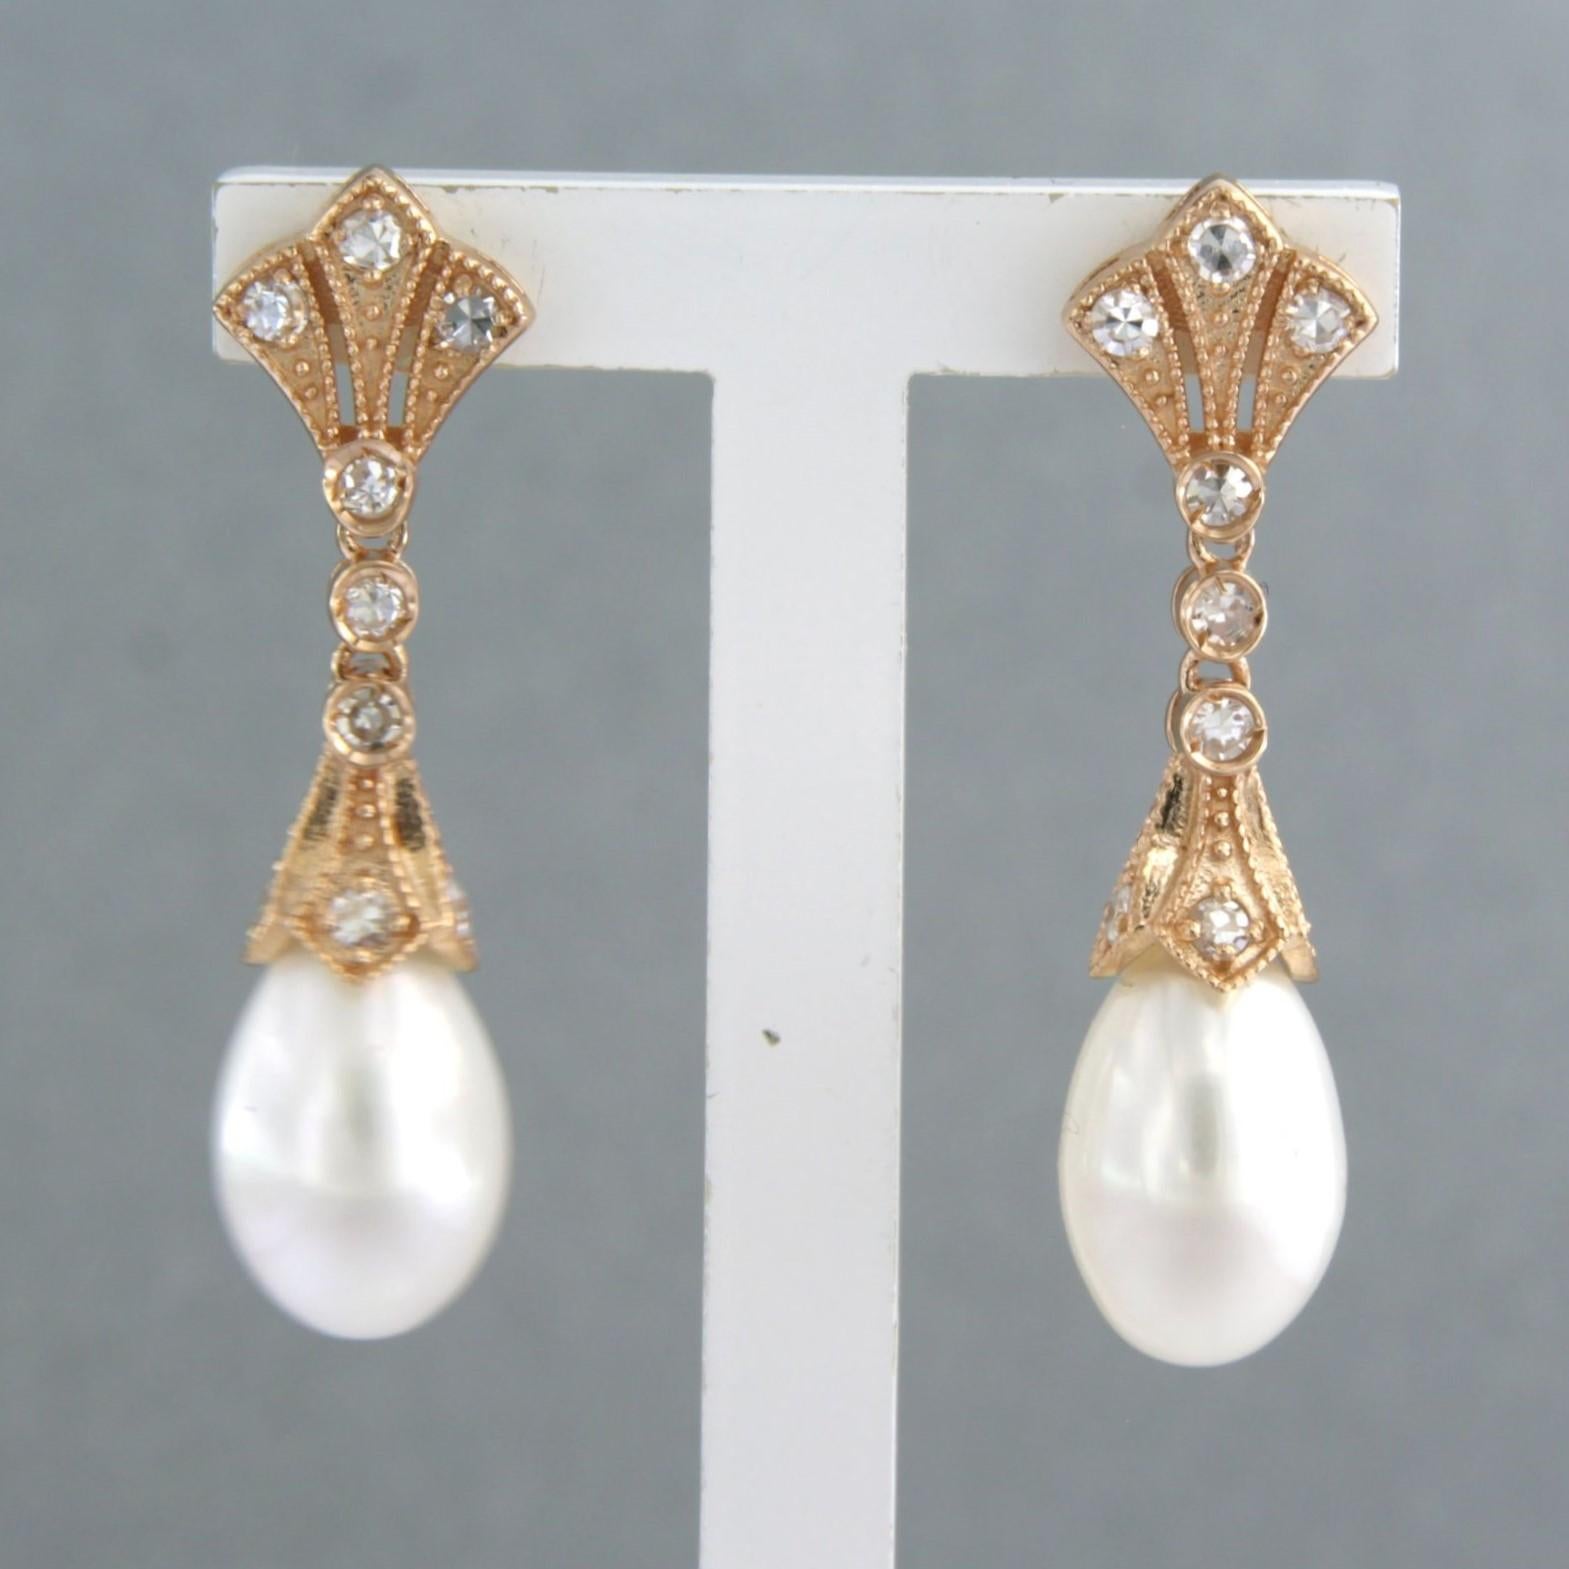 14k pink gold earrings set with pearl and single cut diamonds. 0.34ct - F/G - VS/SI

detailed description:

the size of the earring is 3.0 cm long by 7.3 mm wide

weight 4.7 grams

set with

- 2 x 1.1 cm x 7.3 mm drop shape freshwater pearl

colour